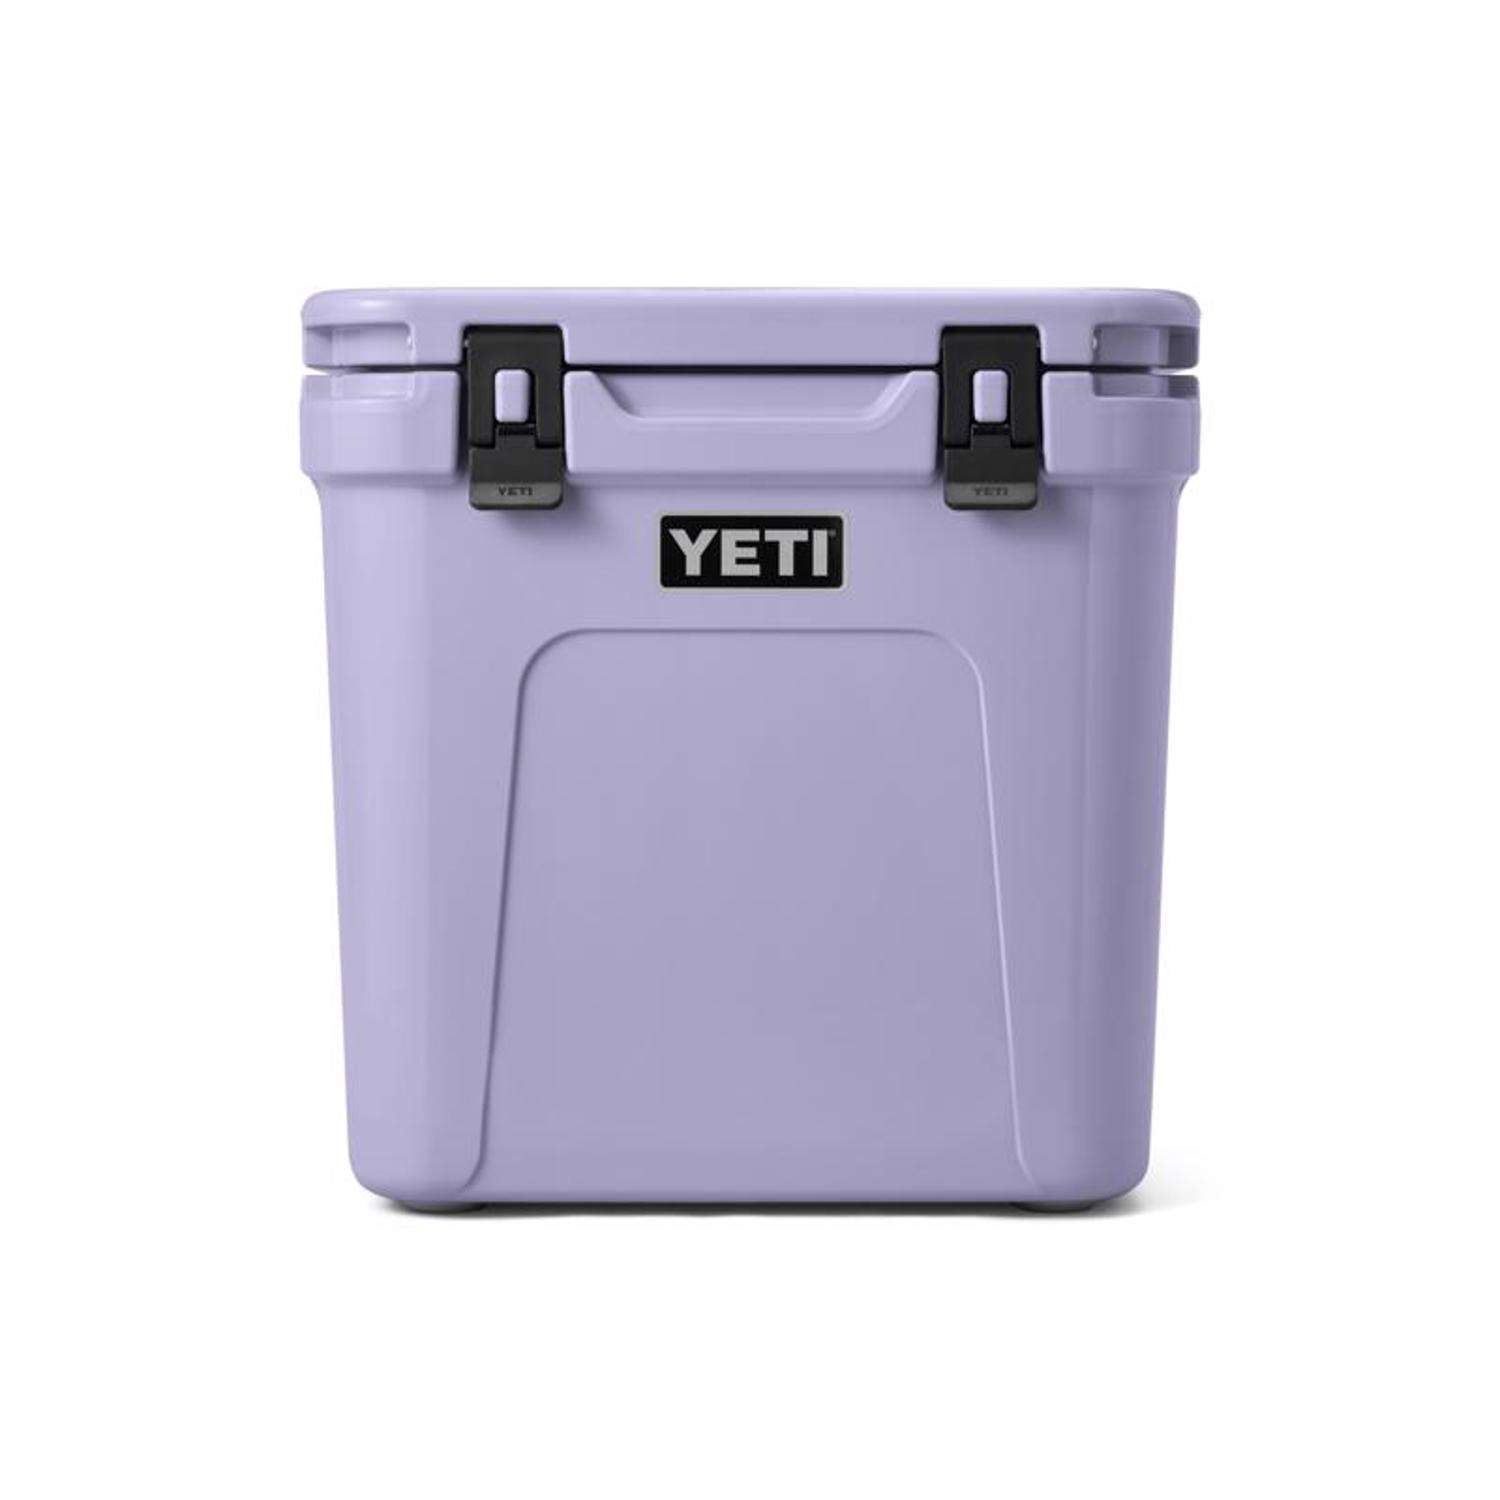 Yeti opens first standalone store in Houston